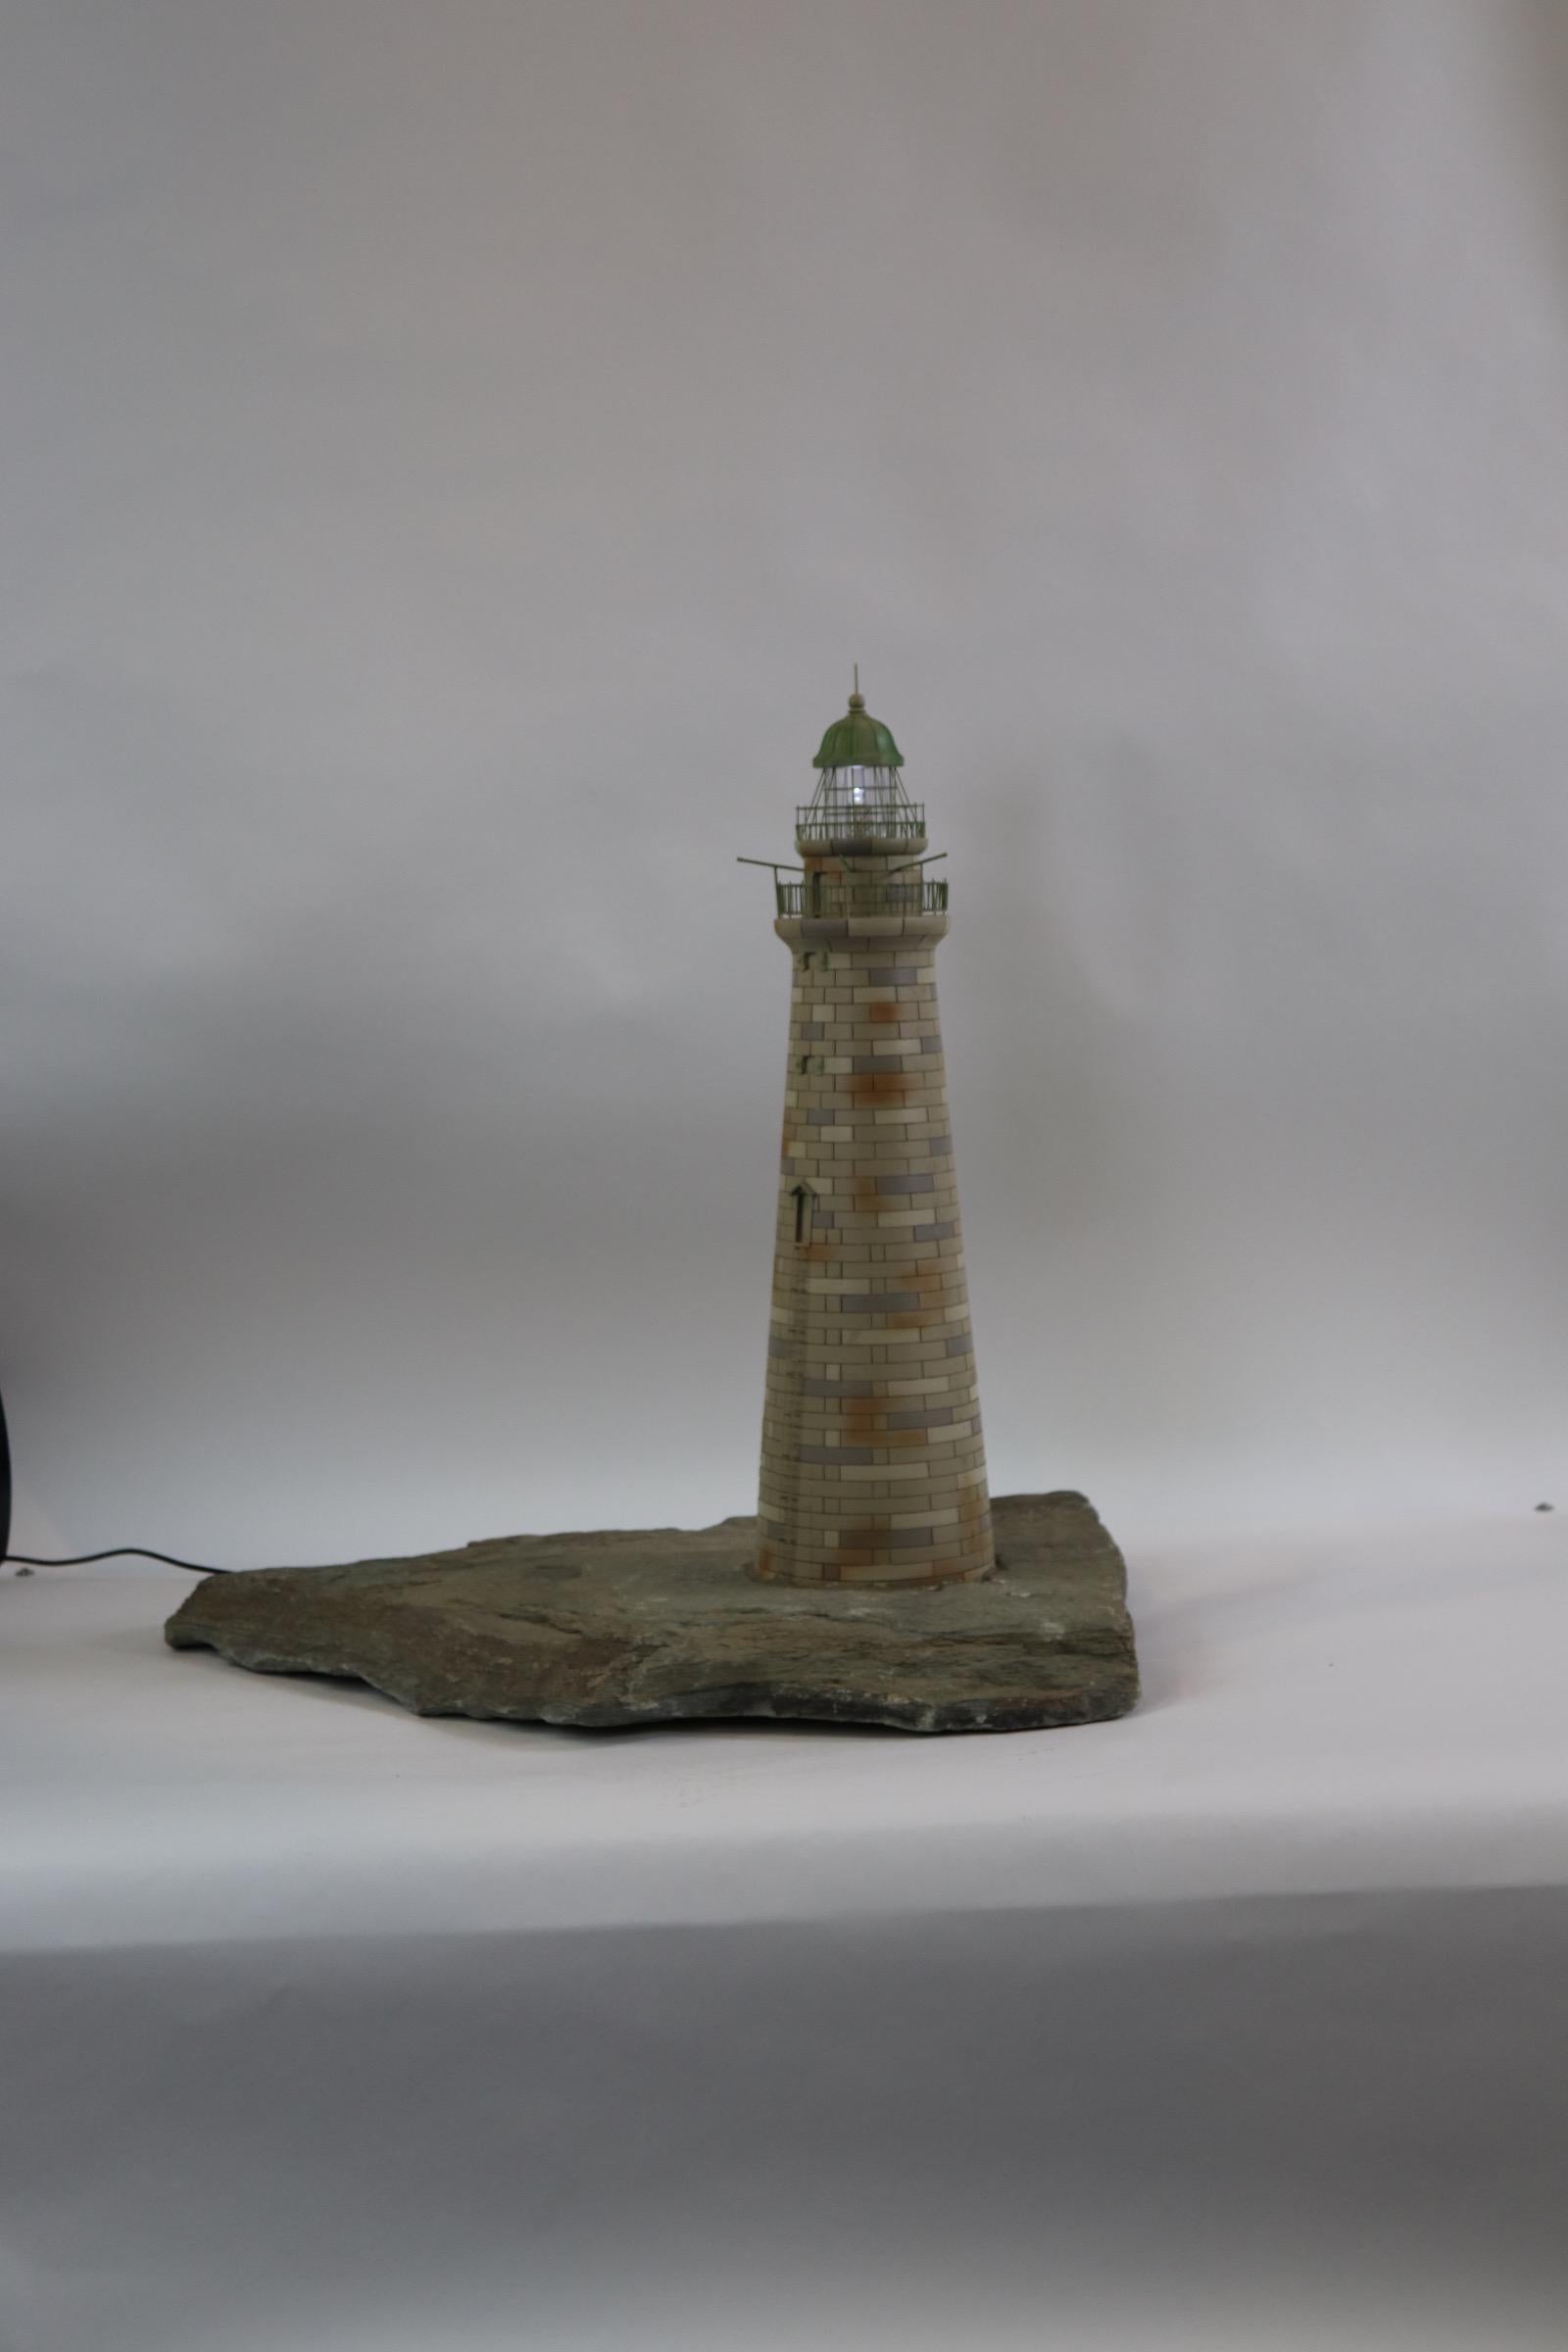 Minots light lighthouse model showing incredible workmanship. This model is very well built and scaled quite well showing the same number of stones as the actual. Mounted onto a piece of thick stone. Fitted with a blinking light in the light room.